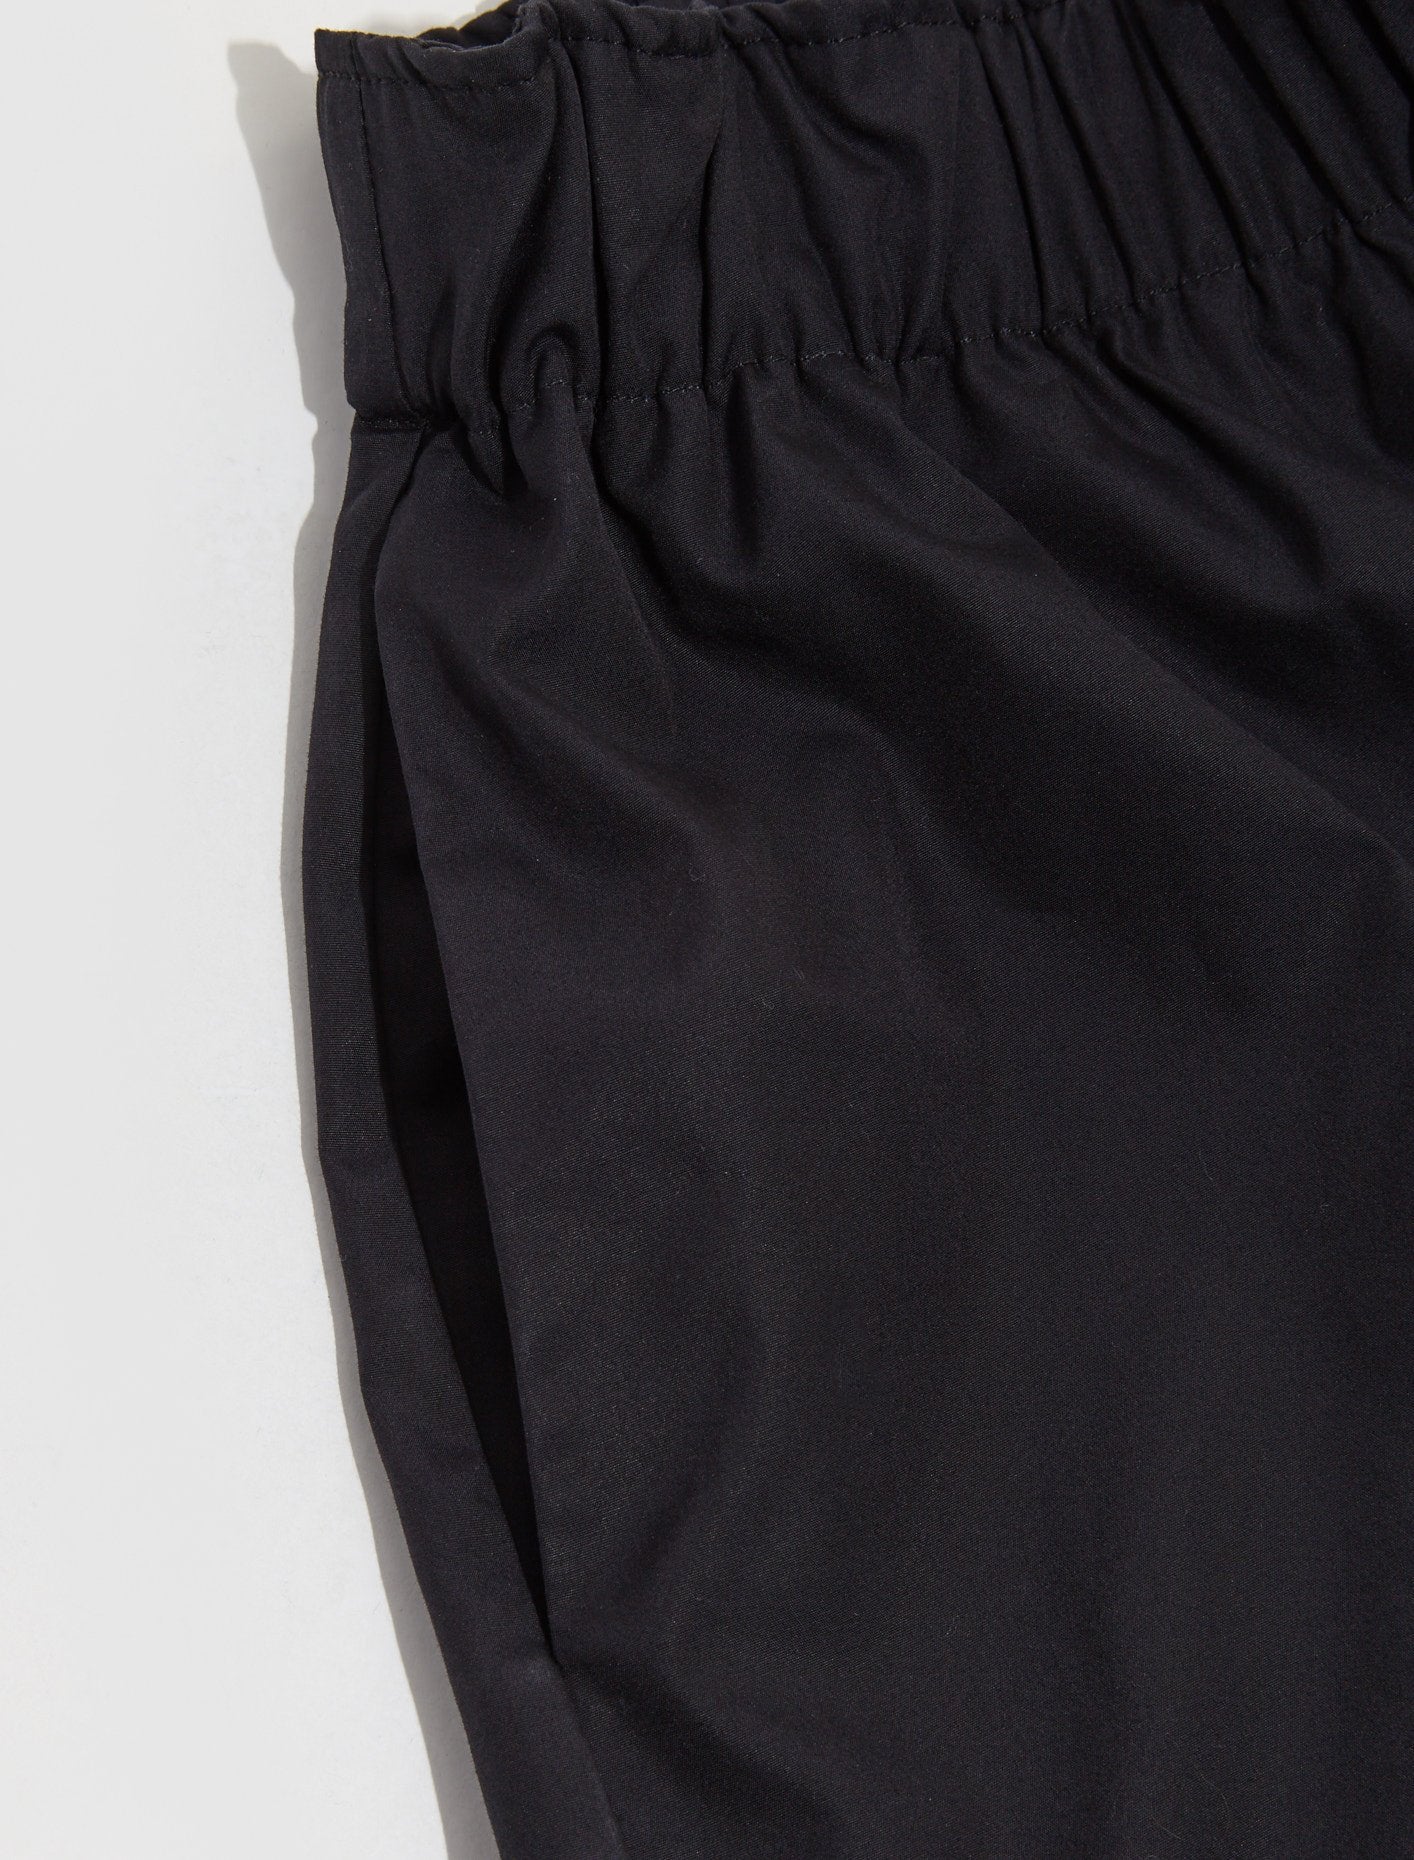 Easy Drawstring Shorts with Trim in Black